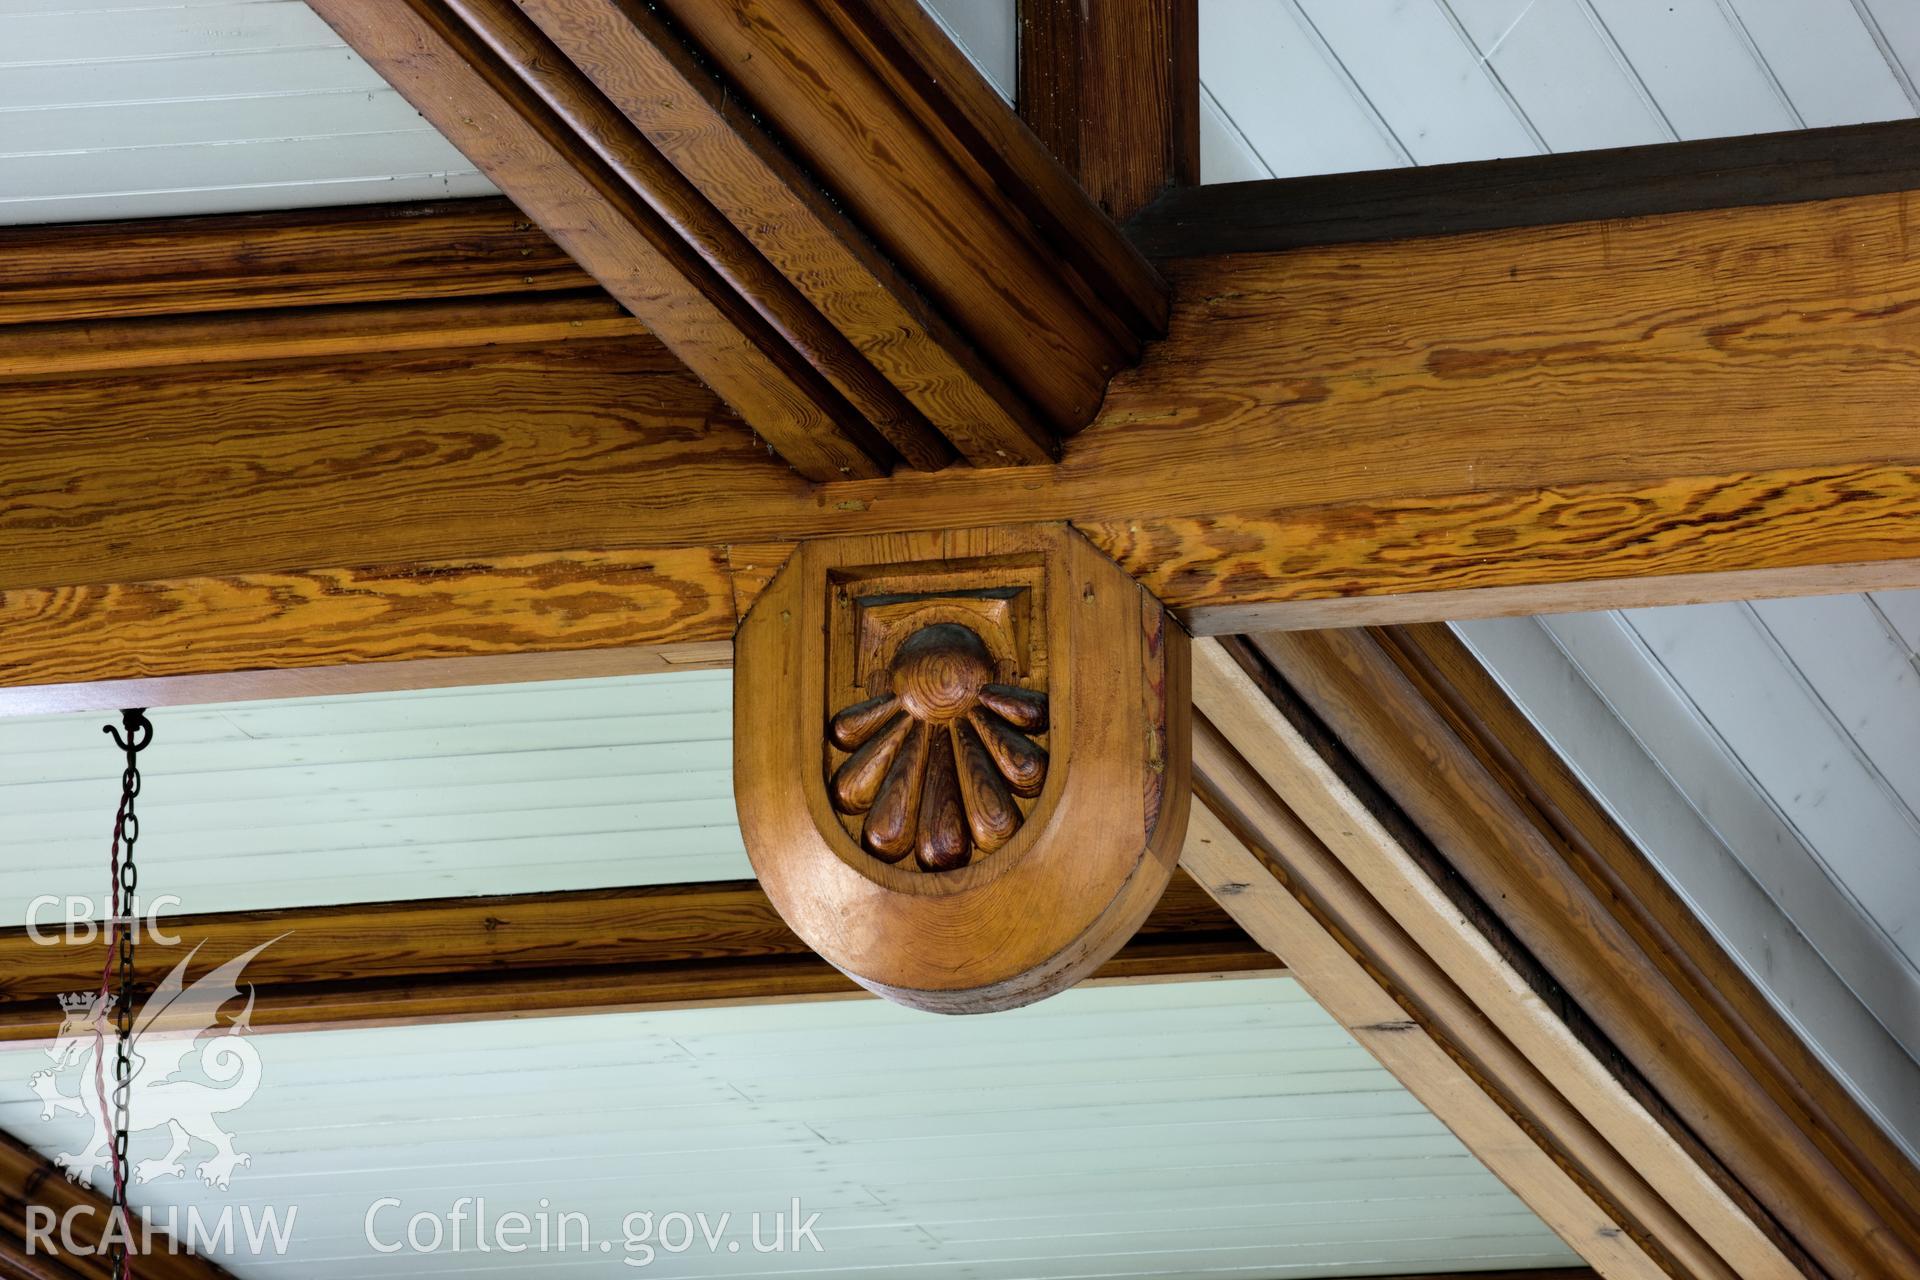 Detail of timber support decoration.